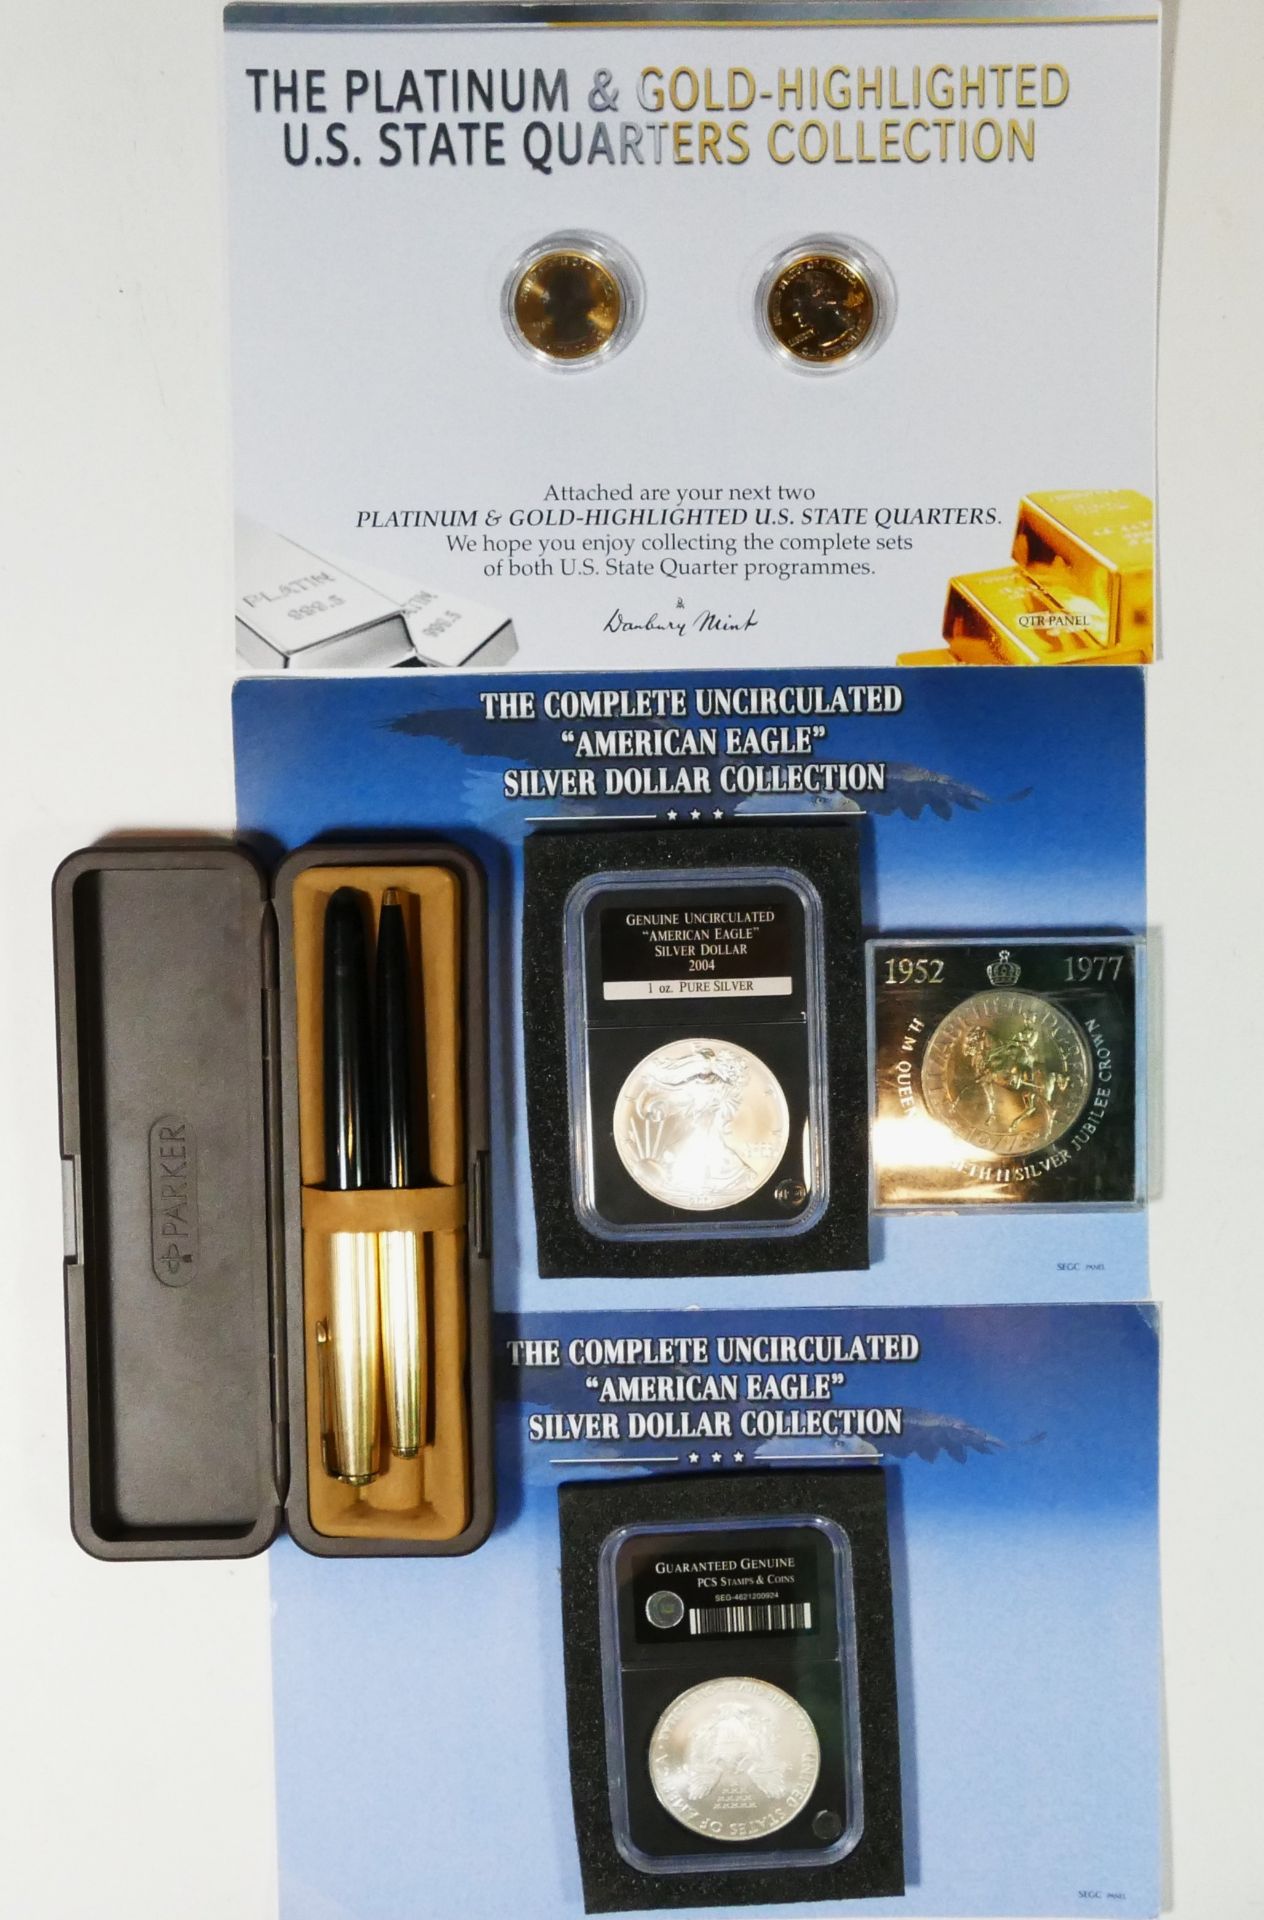 A cased Parker pen set, together with two silver dollar coins, a Silver Jubilee coin and two